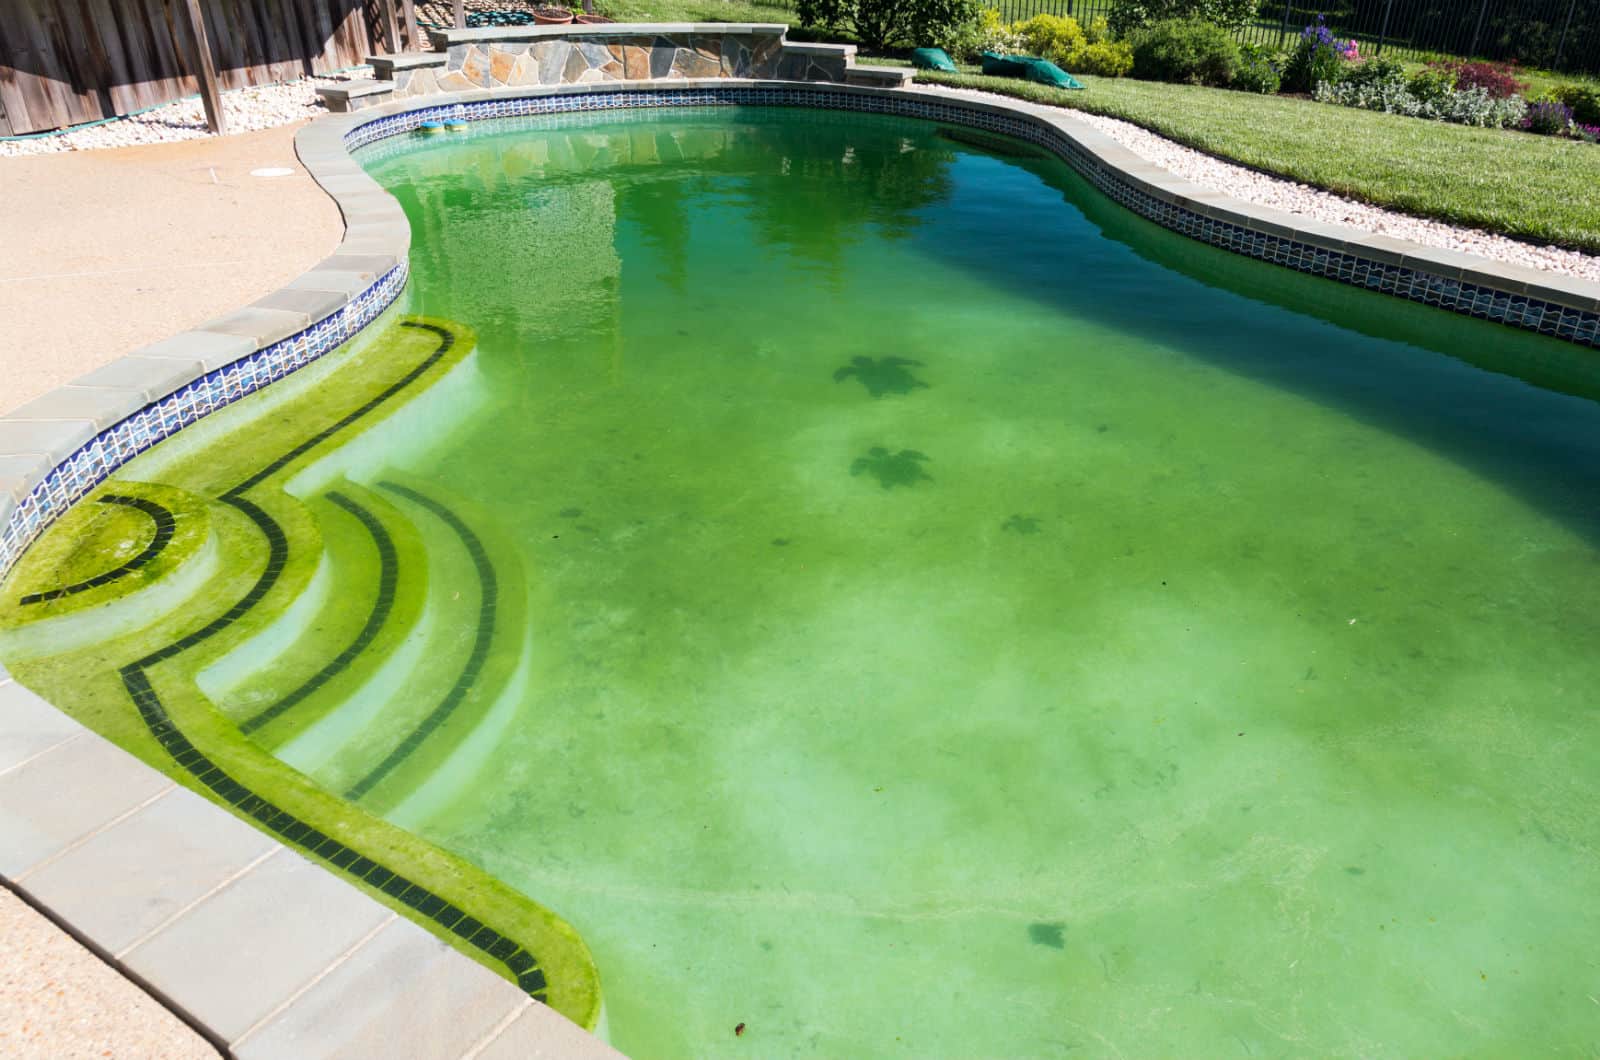 Don’t Let This Happen To You! Pool Maintenance Professionals In Orange County, Ca. Are Valuable